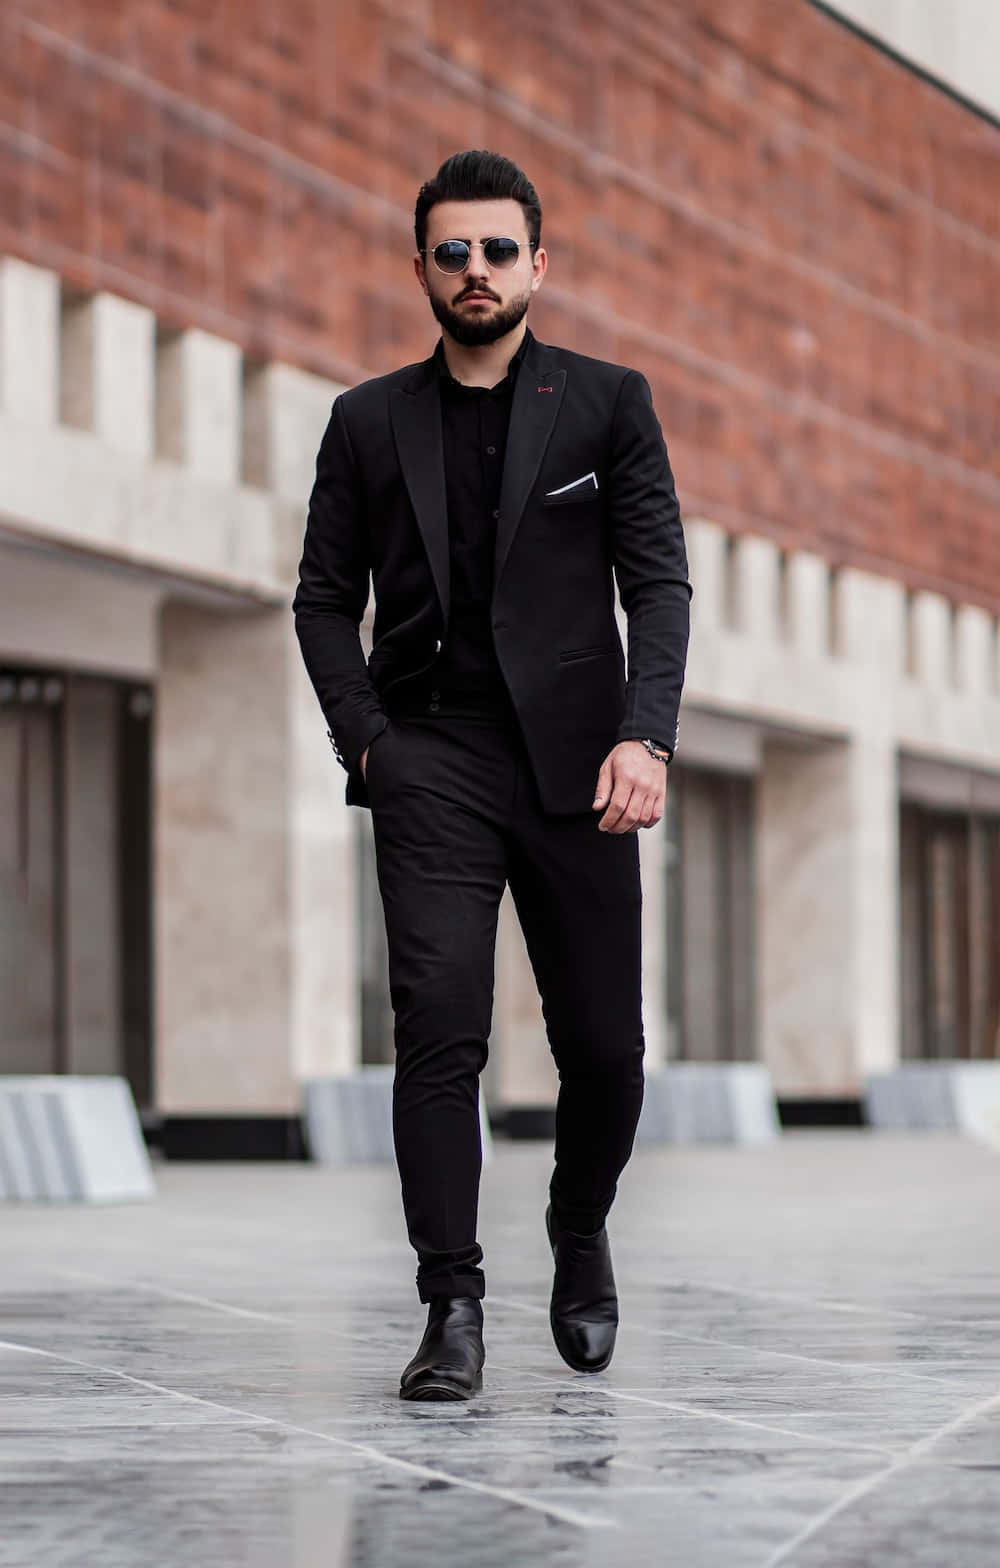 Look sharp with a well-fitted suit